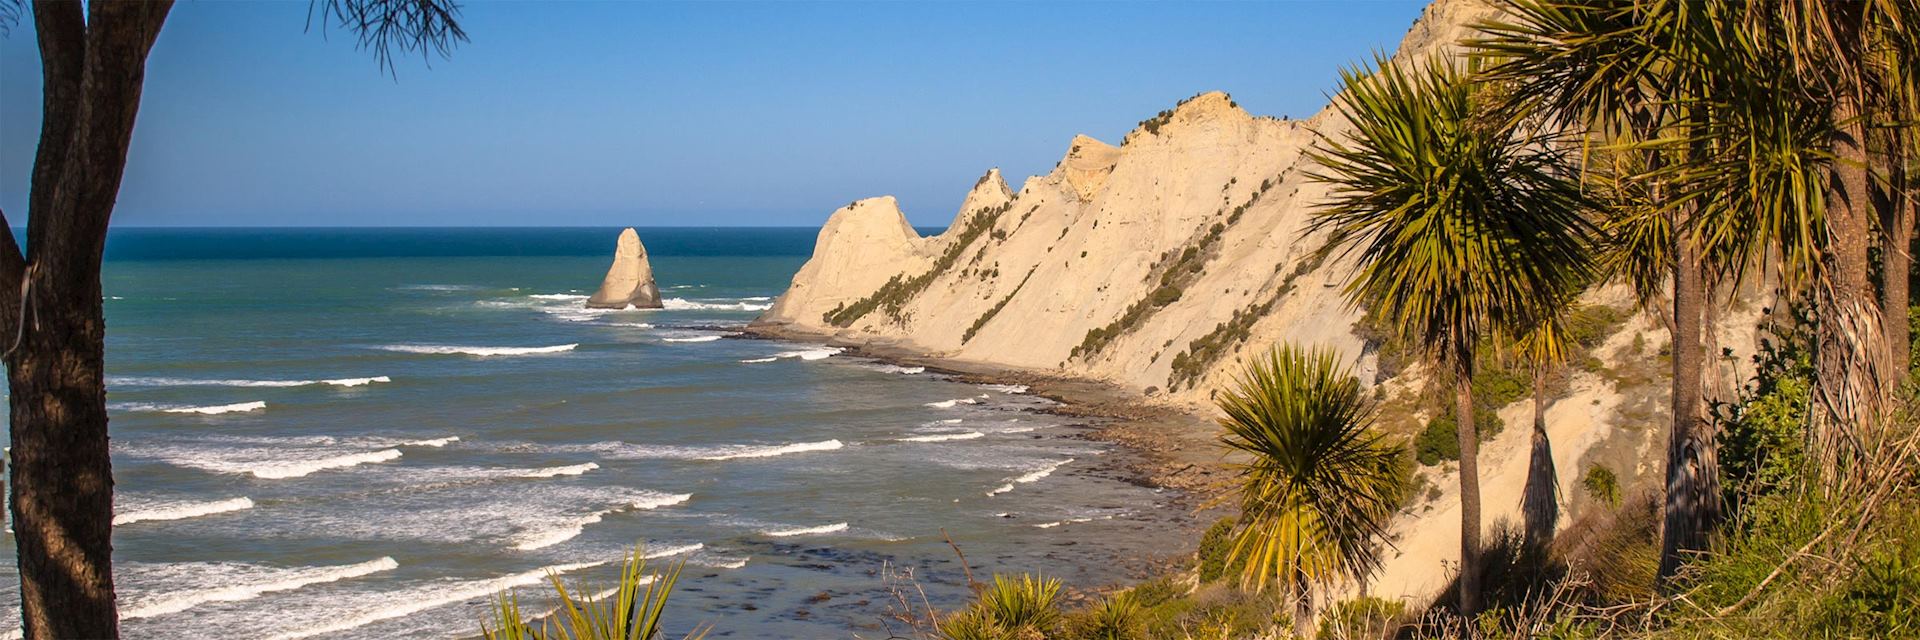 Cape Kidnappers, Hawke's Bay